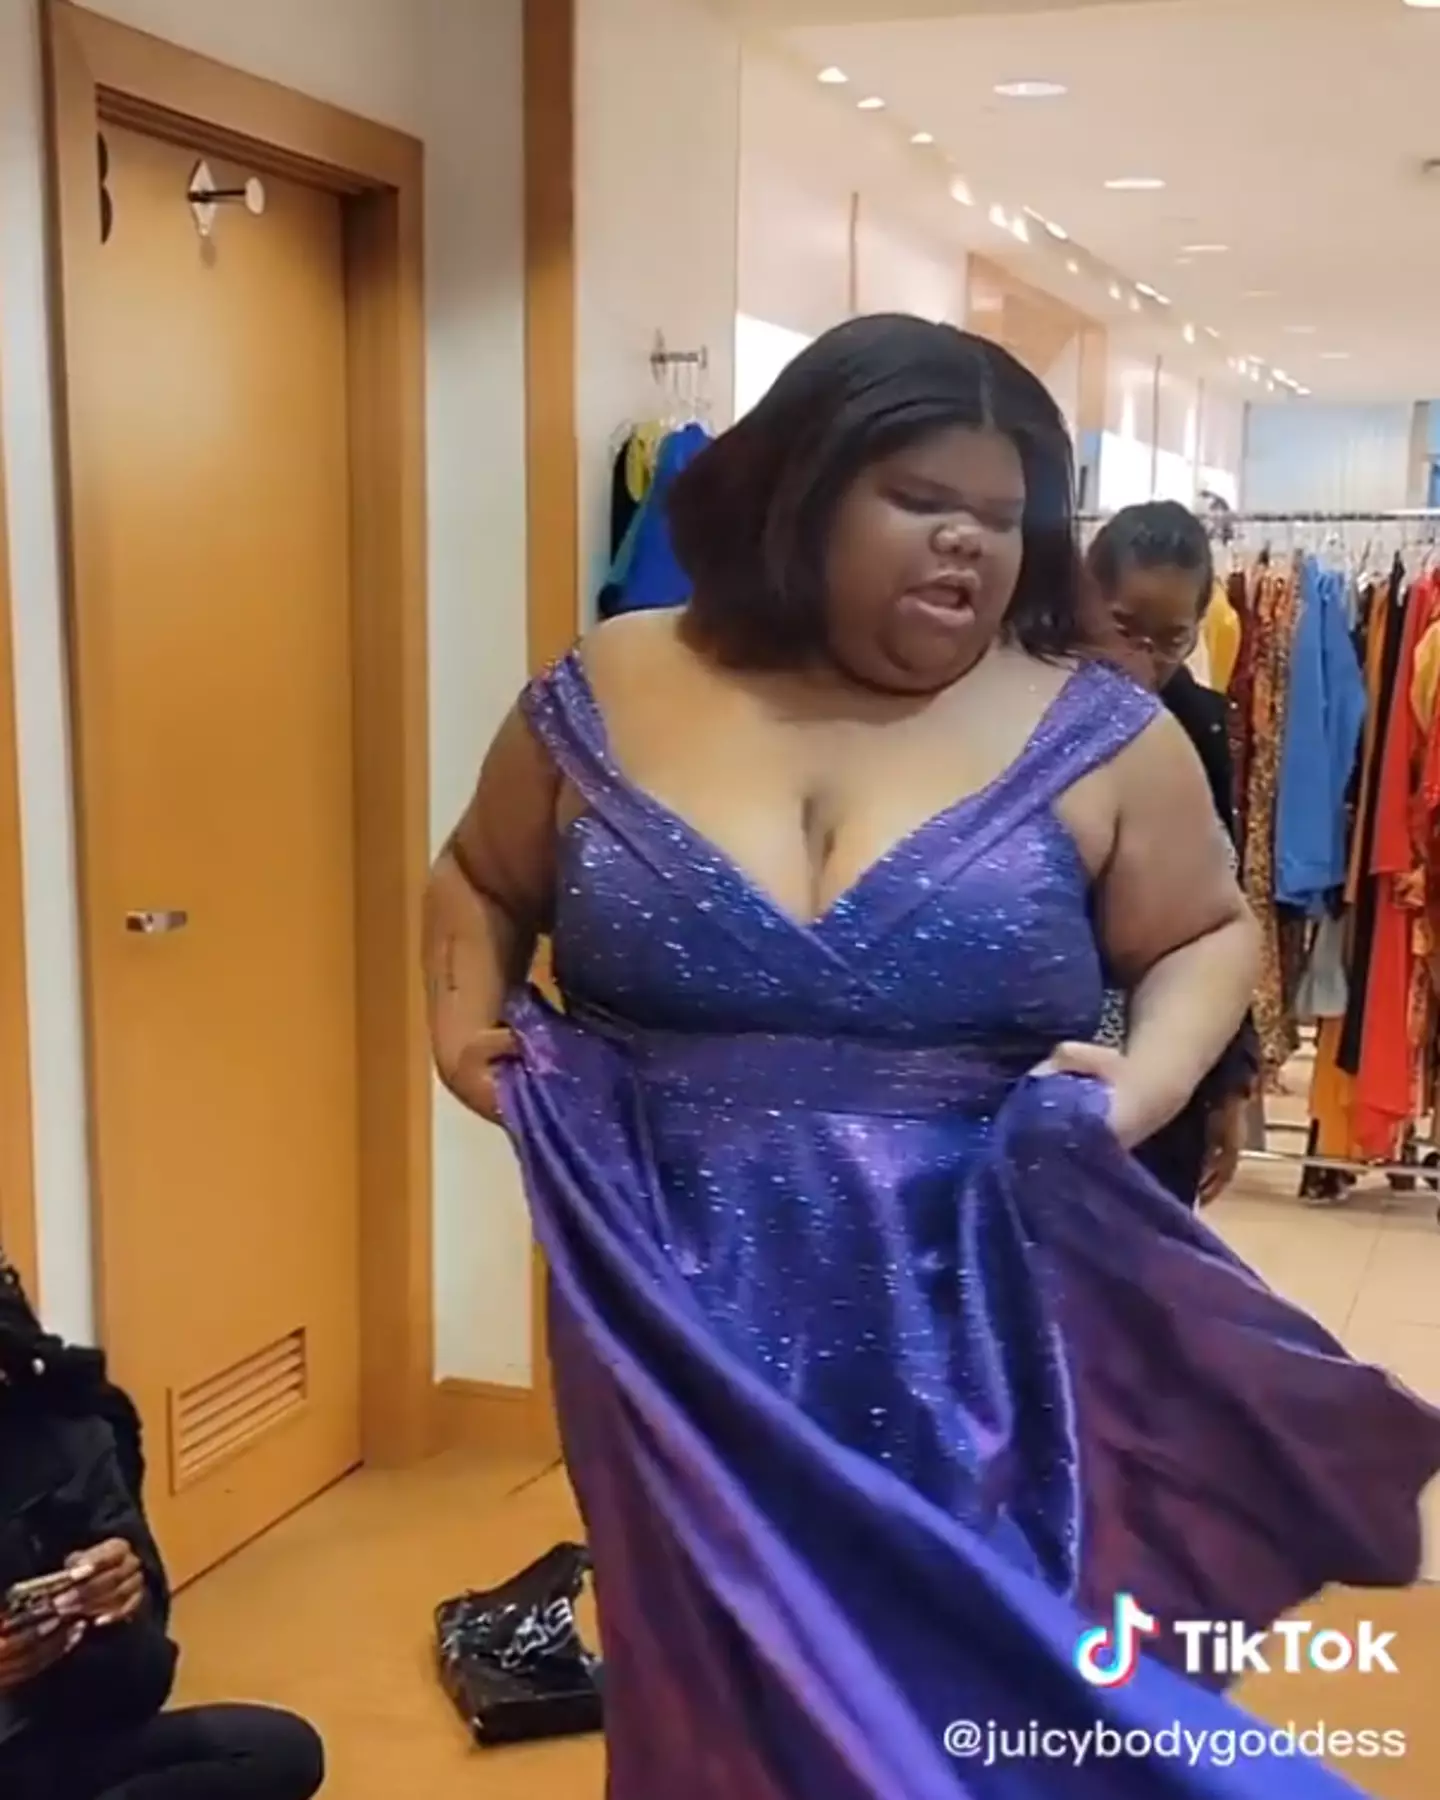 The teen drove over six hours to try on the dresses.